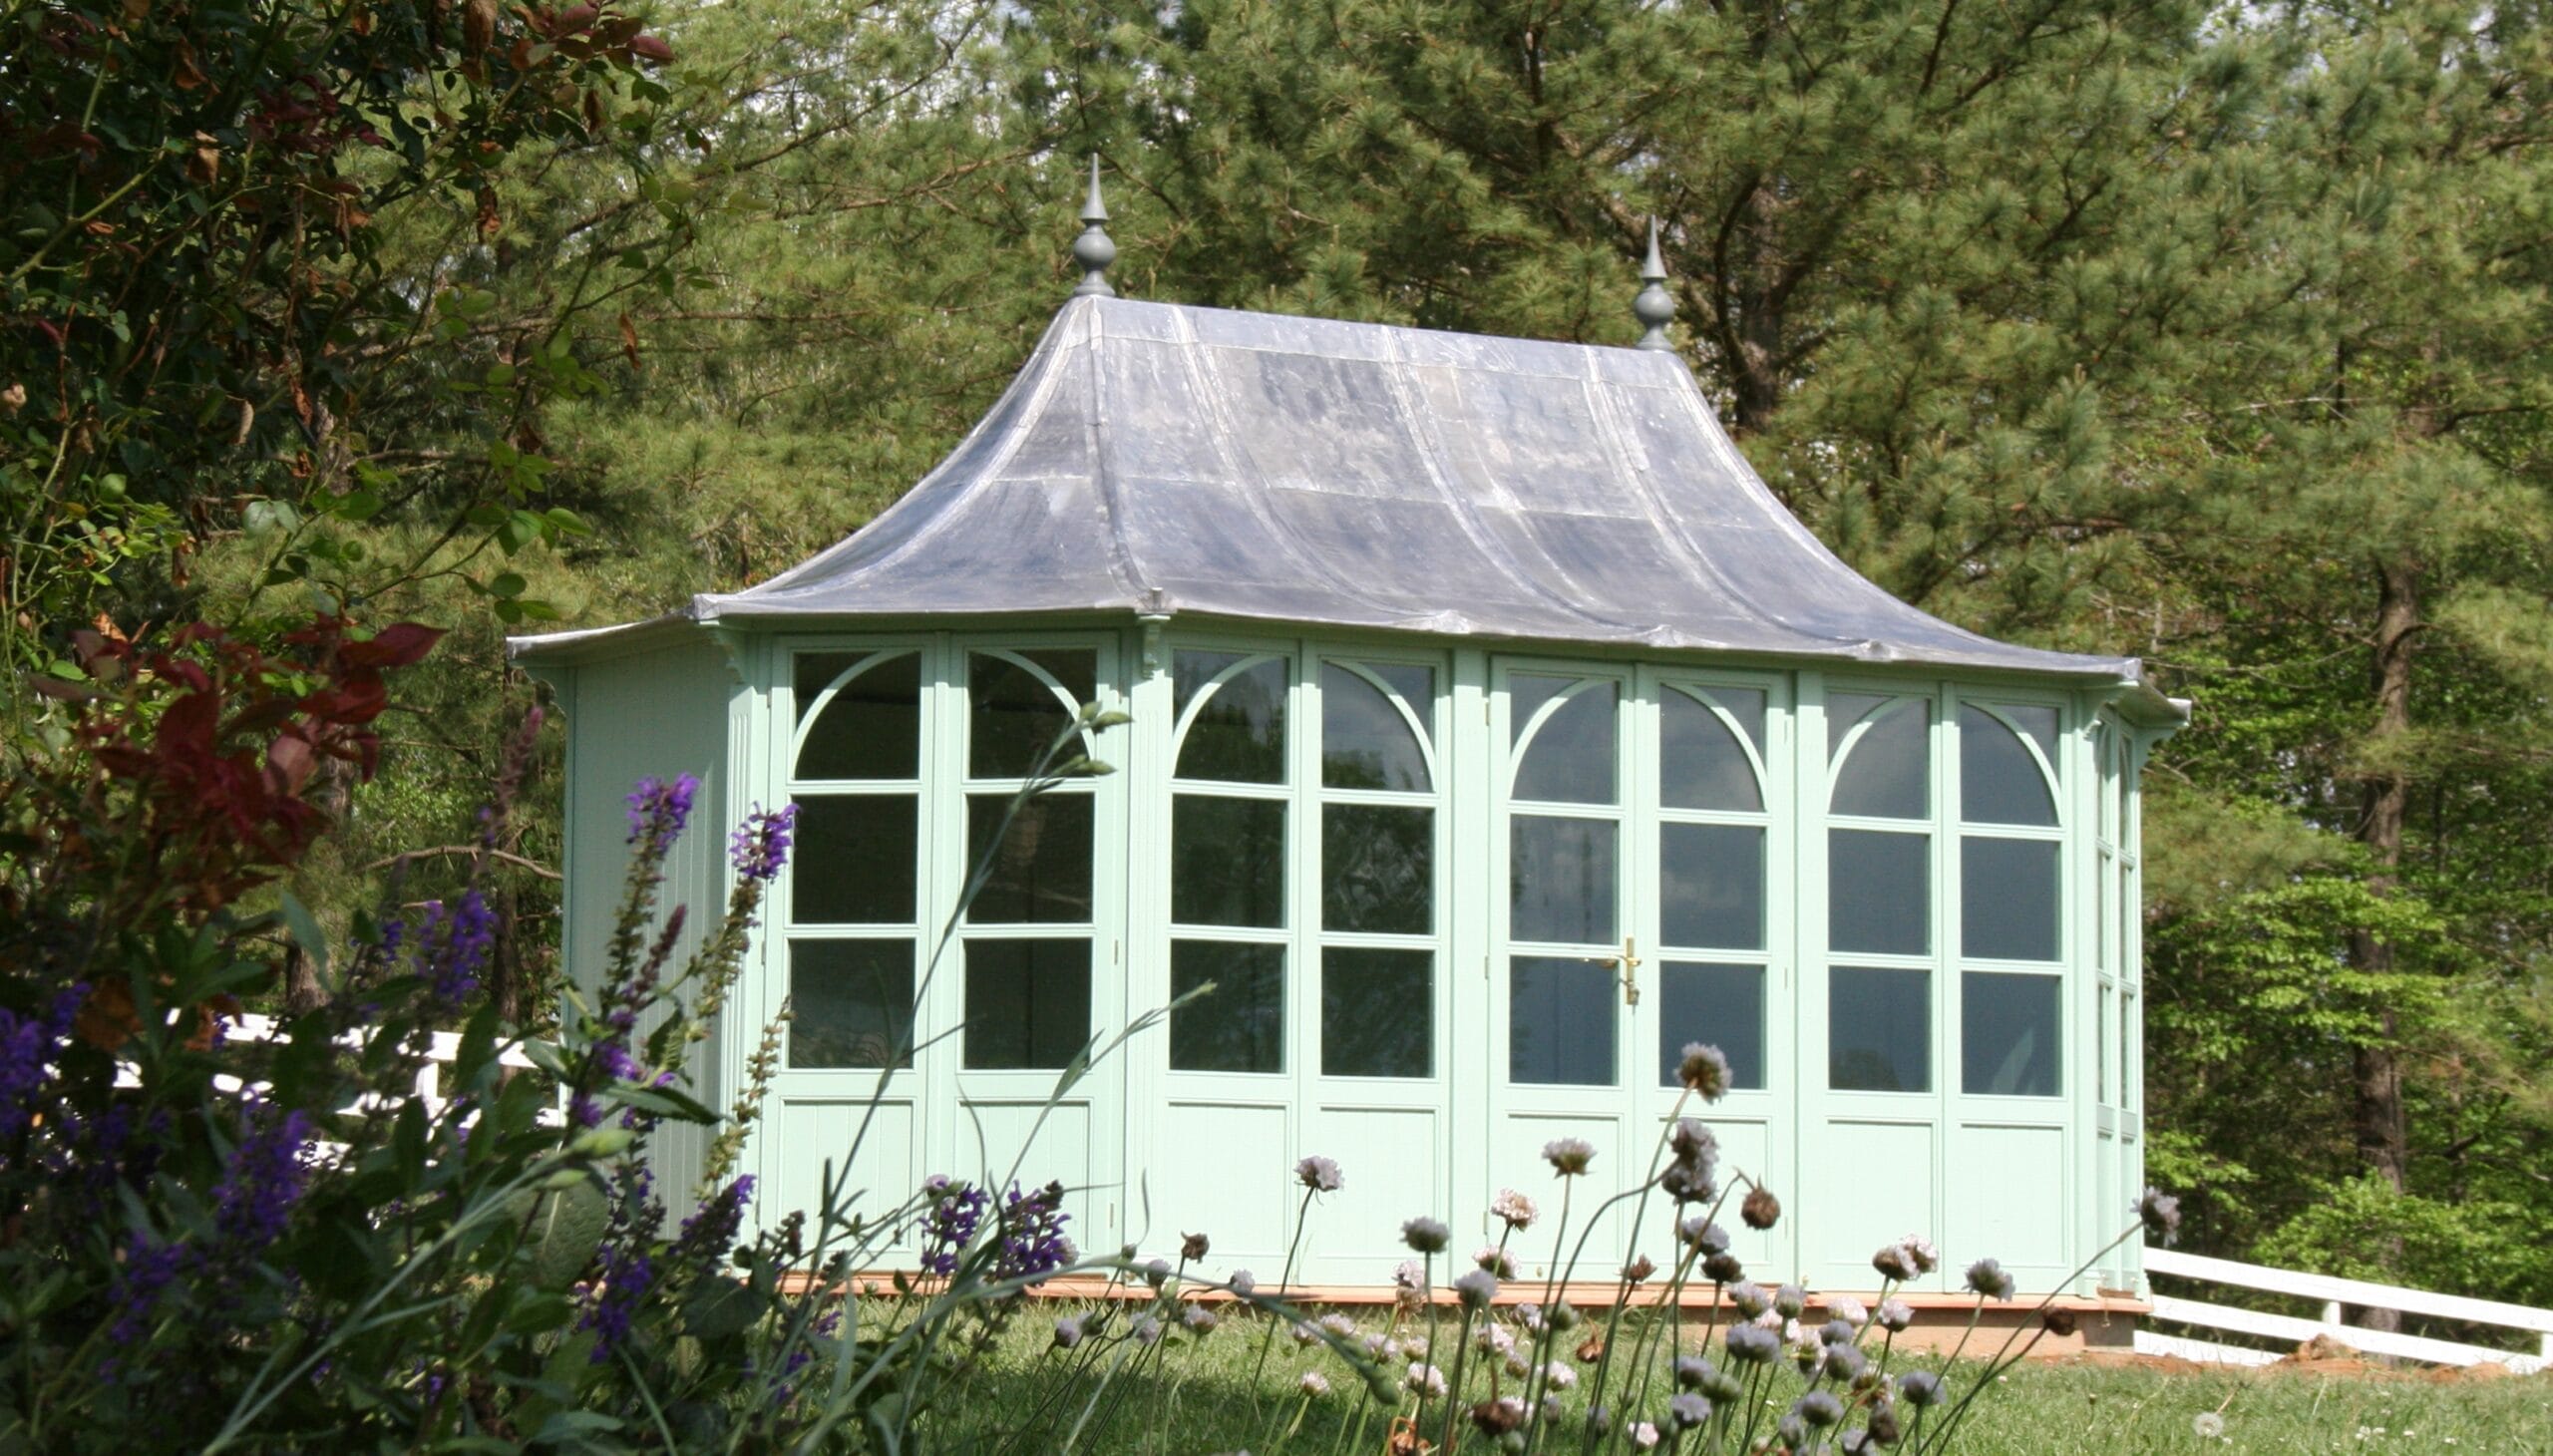 The Stow Summerhouse